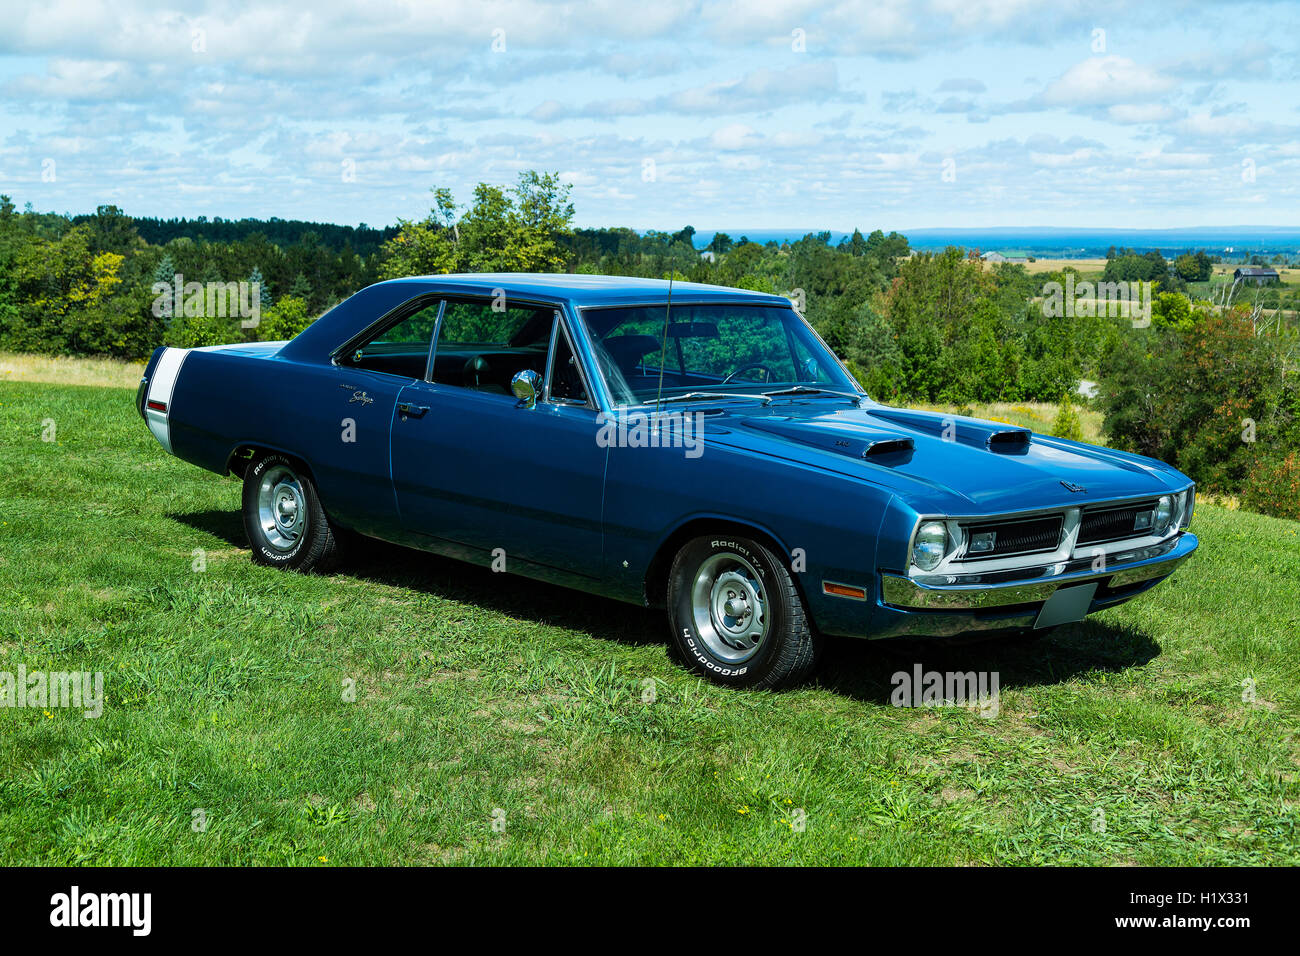 Dodge dart 1970 hi-res stock photography and images image pic